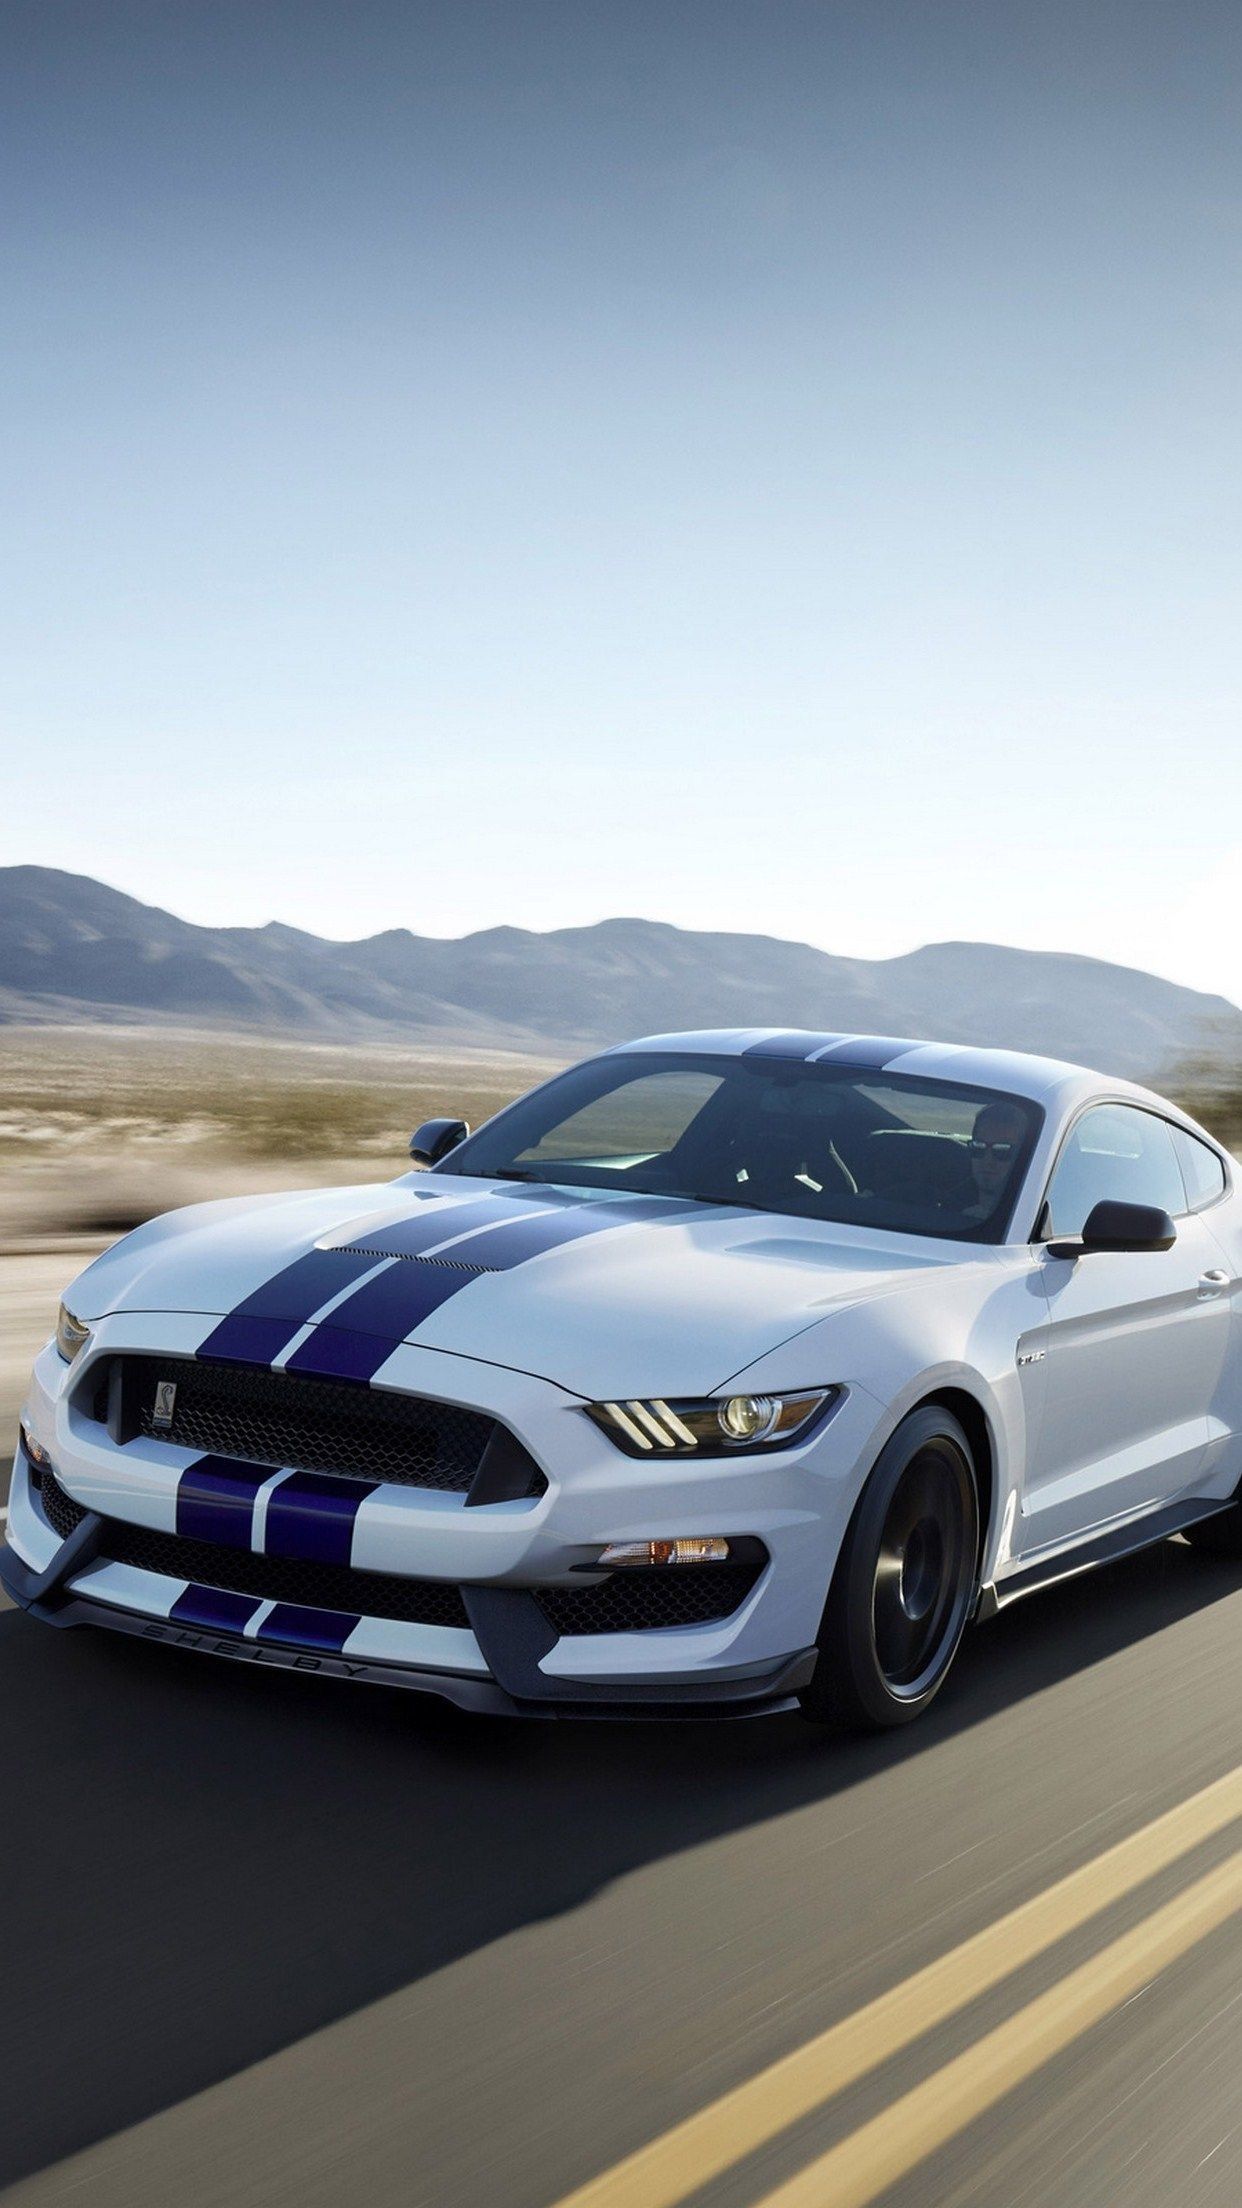 Mustang Shelby Wallpaper iPhone .itl.cat